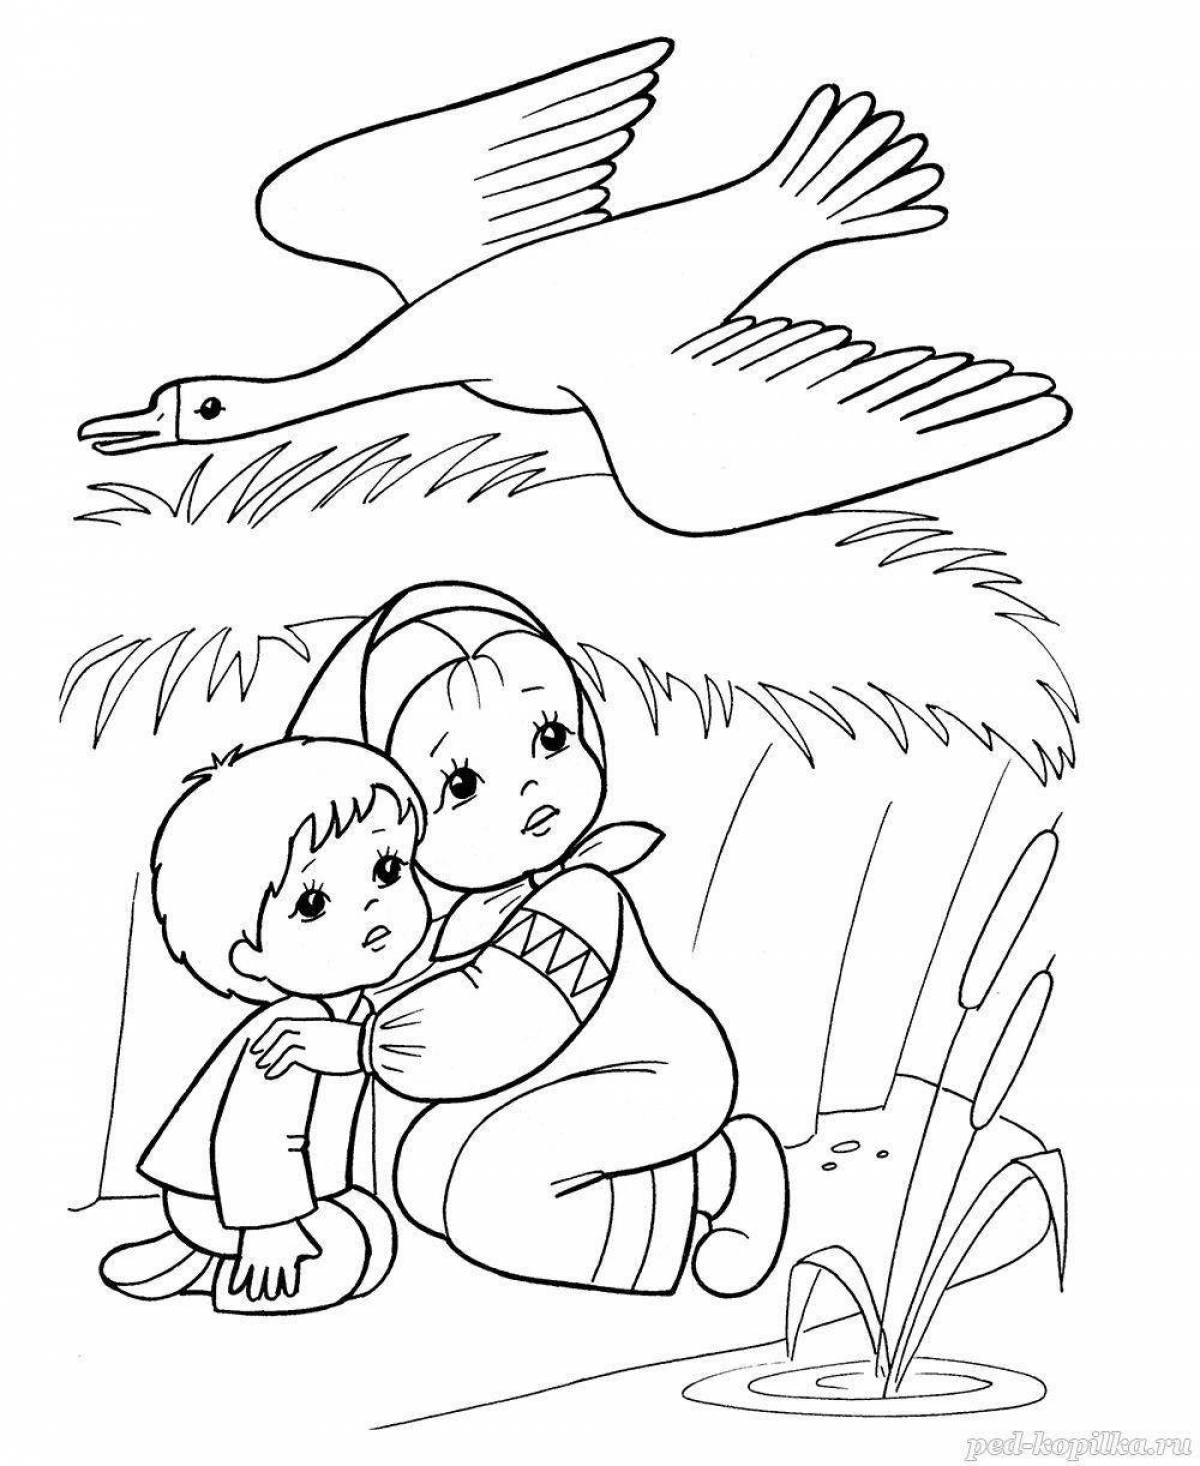 Violent coloring of swan geese for children